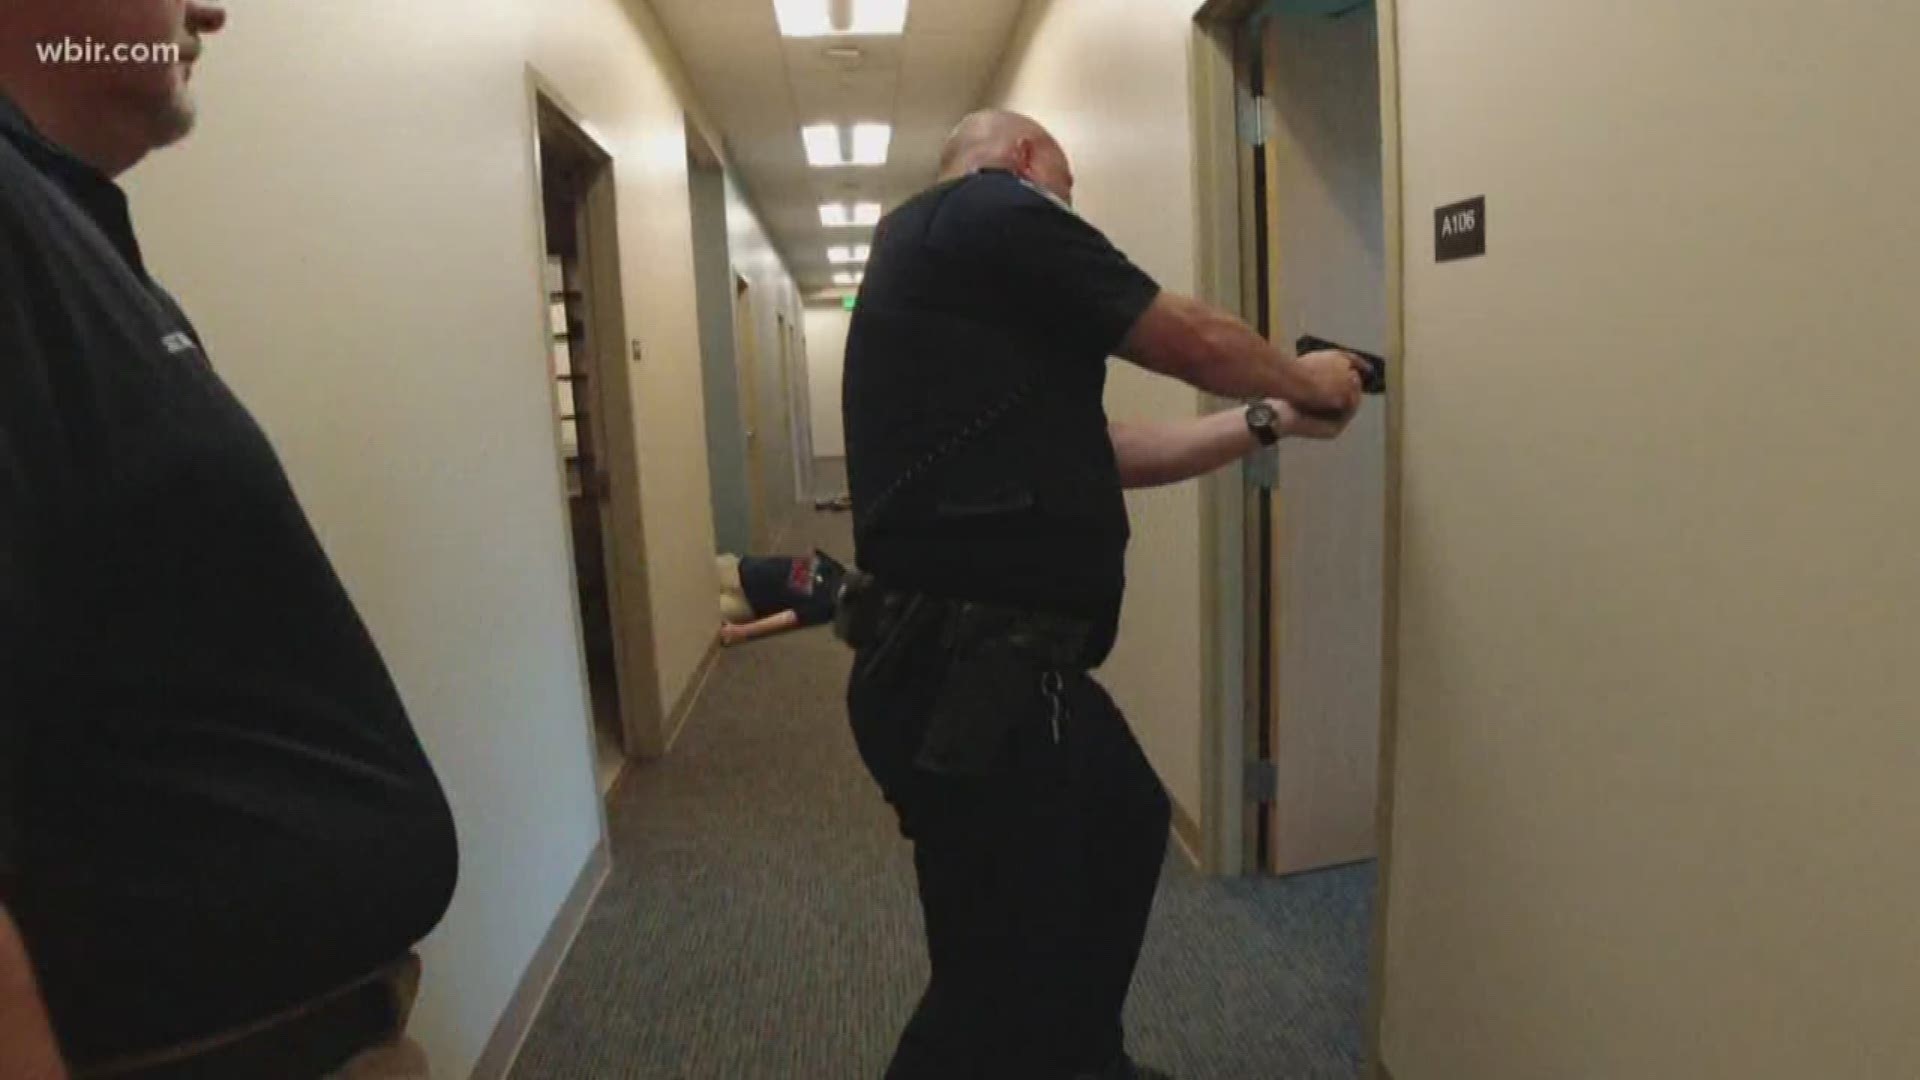 All law enforcement officers in Jefferson Co. participated in active shooter training so they all know the appropriate response. They used volunteer victims to make the scenarios as realistic as possible.